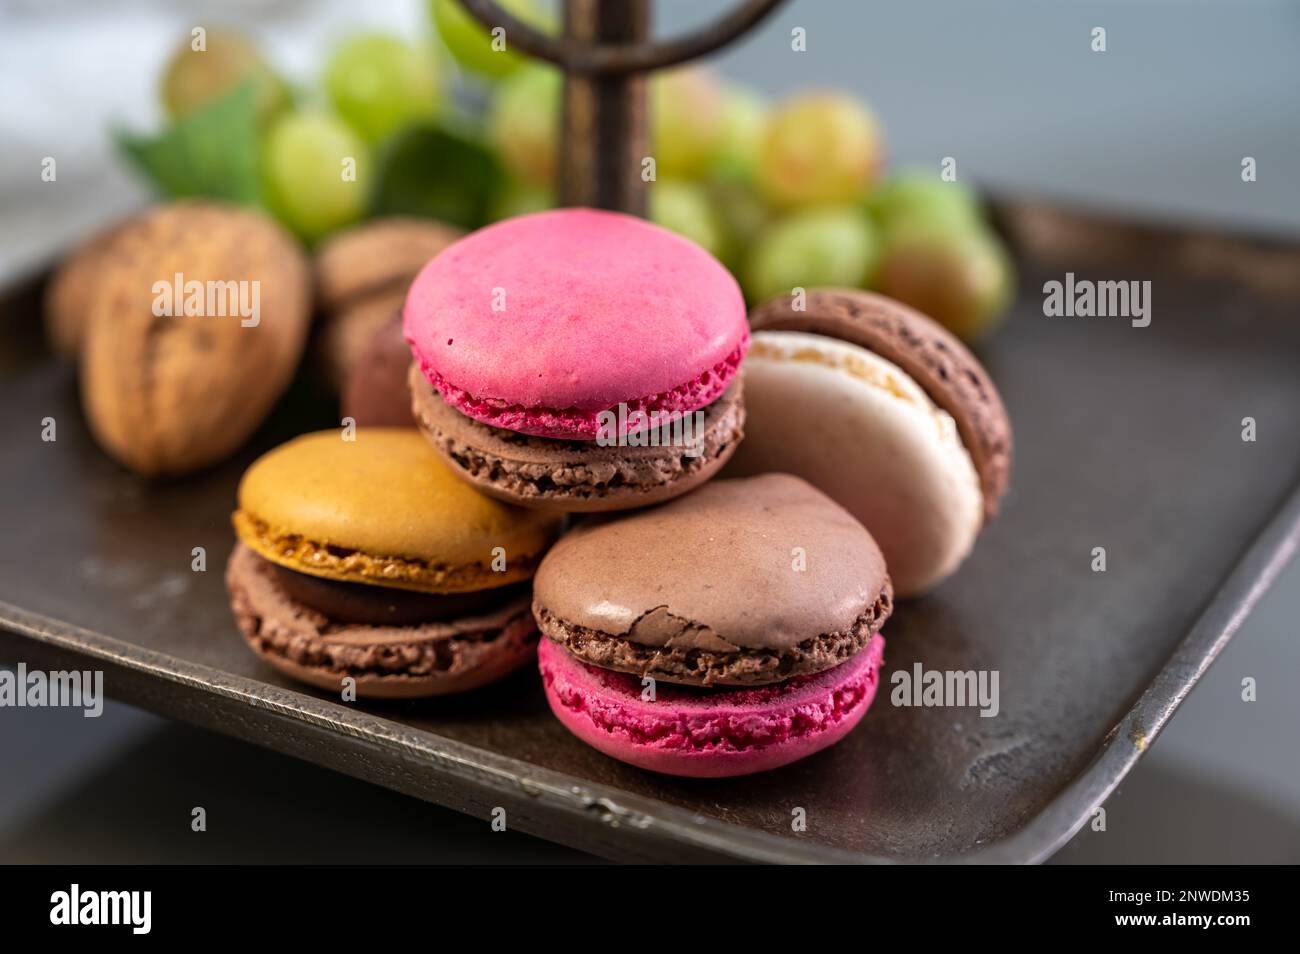 Macarons or French macaroon  sweet meringue-based confection made with egg white, icing sugar, granulated sugar, almond meal, and food colouring, swee Stock Photo